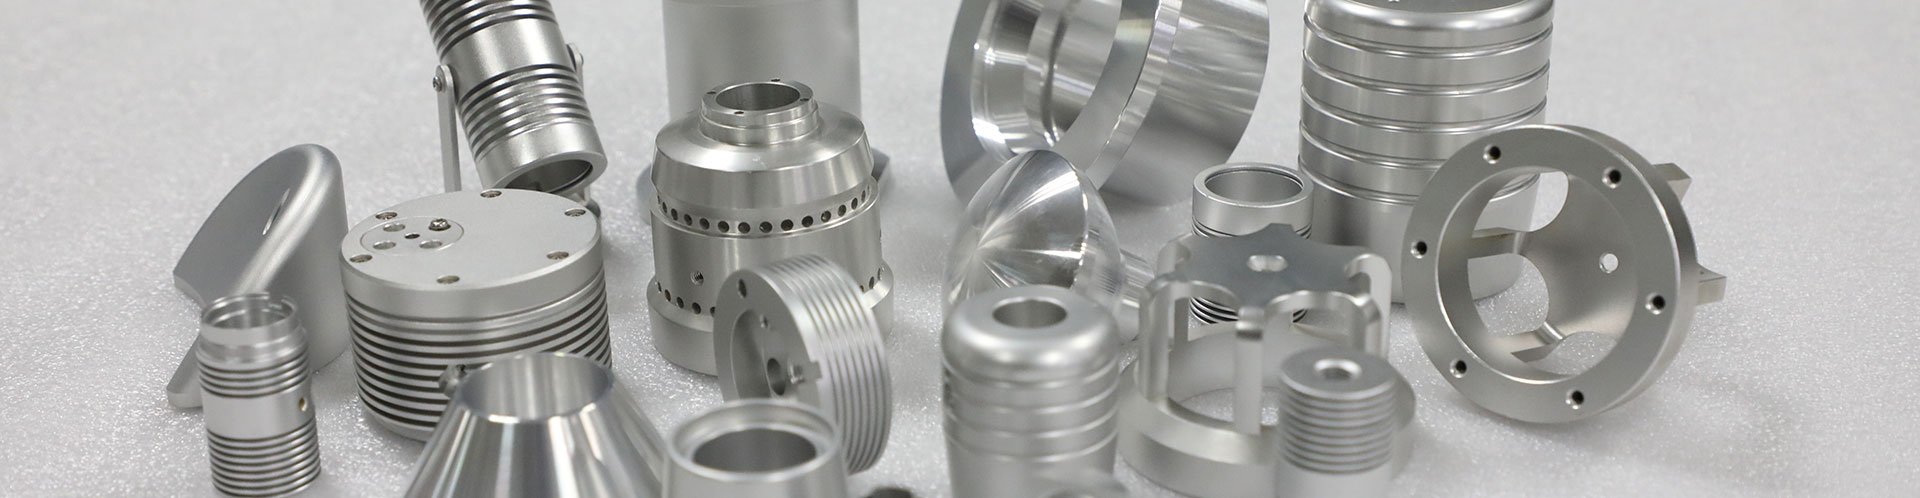 High Quality Precision Machined Products